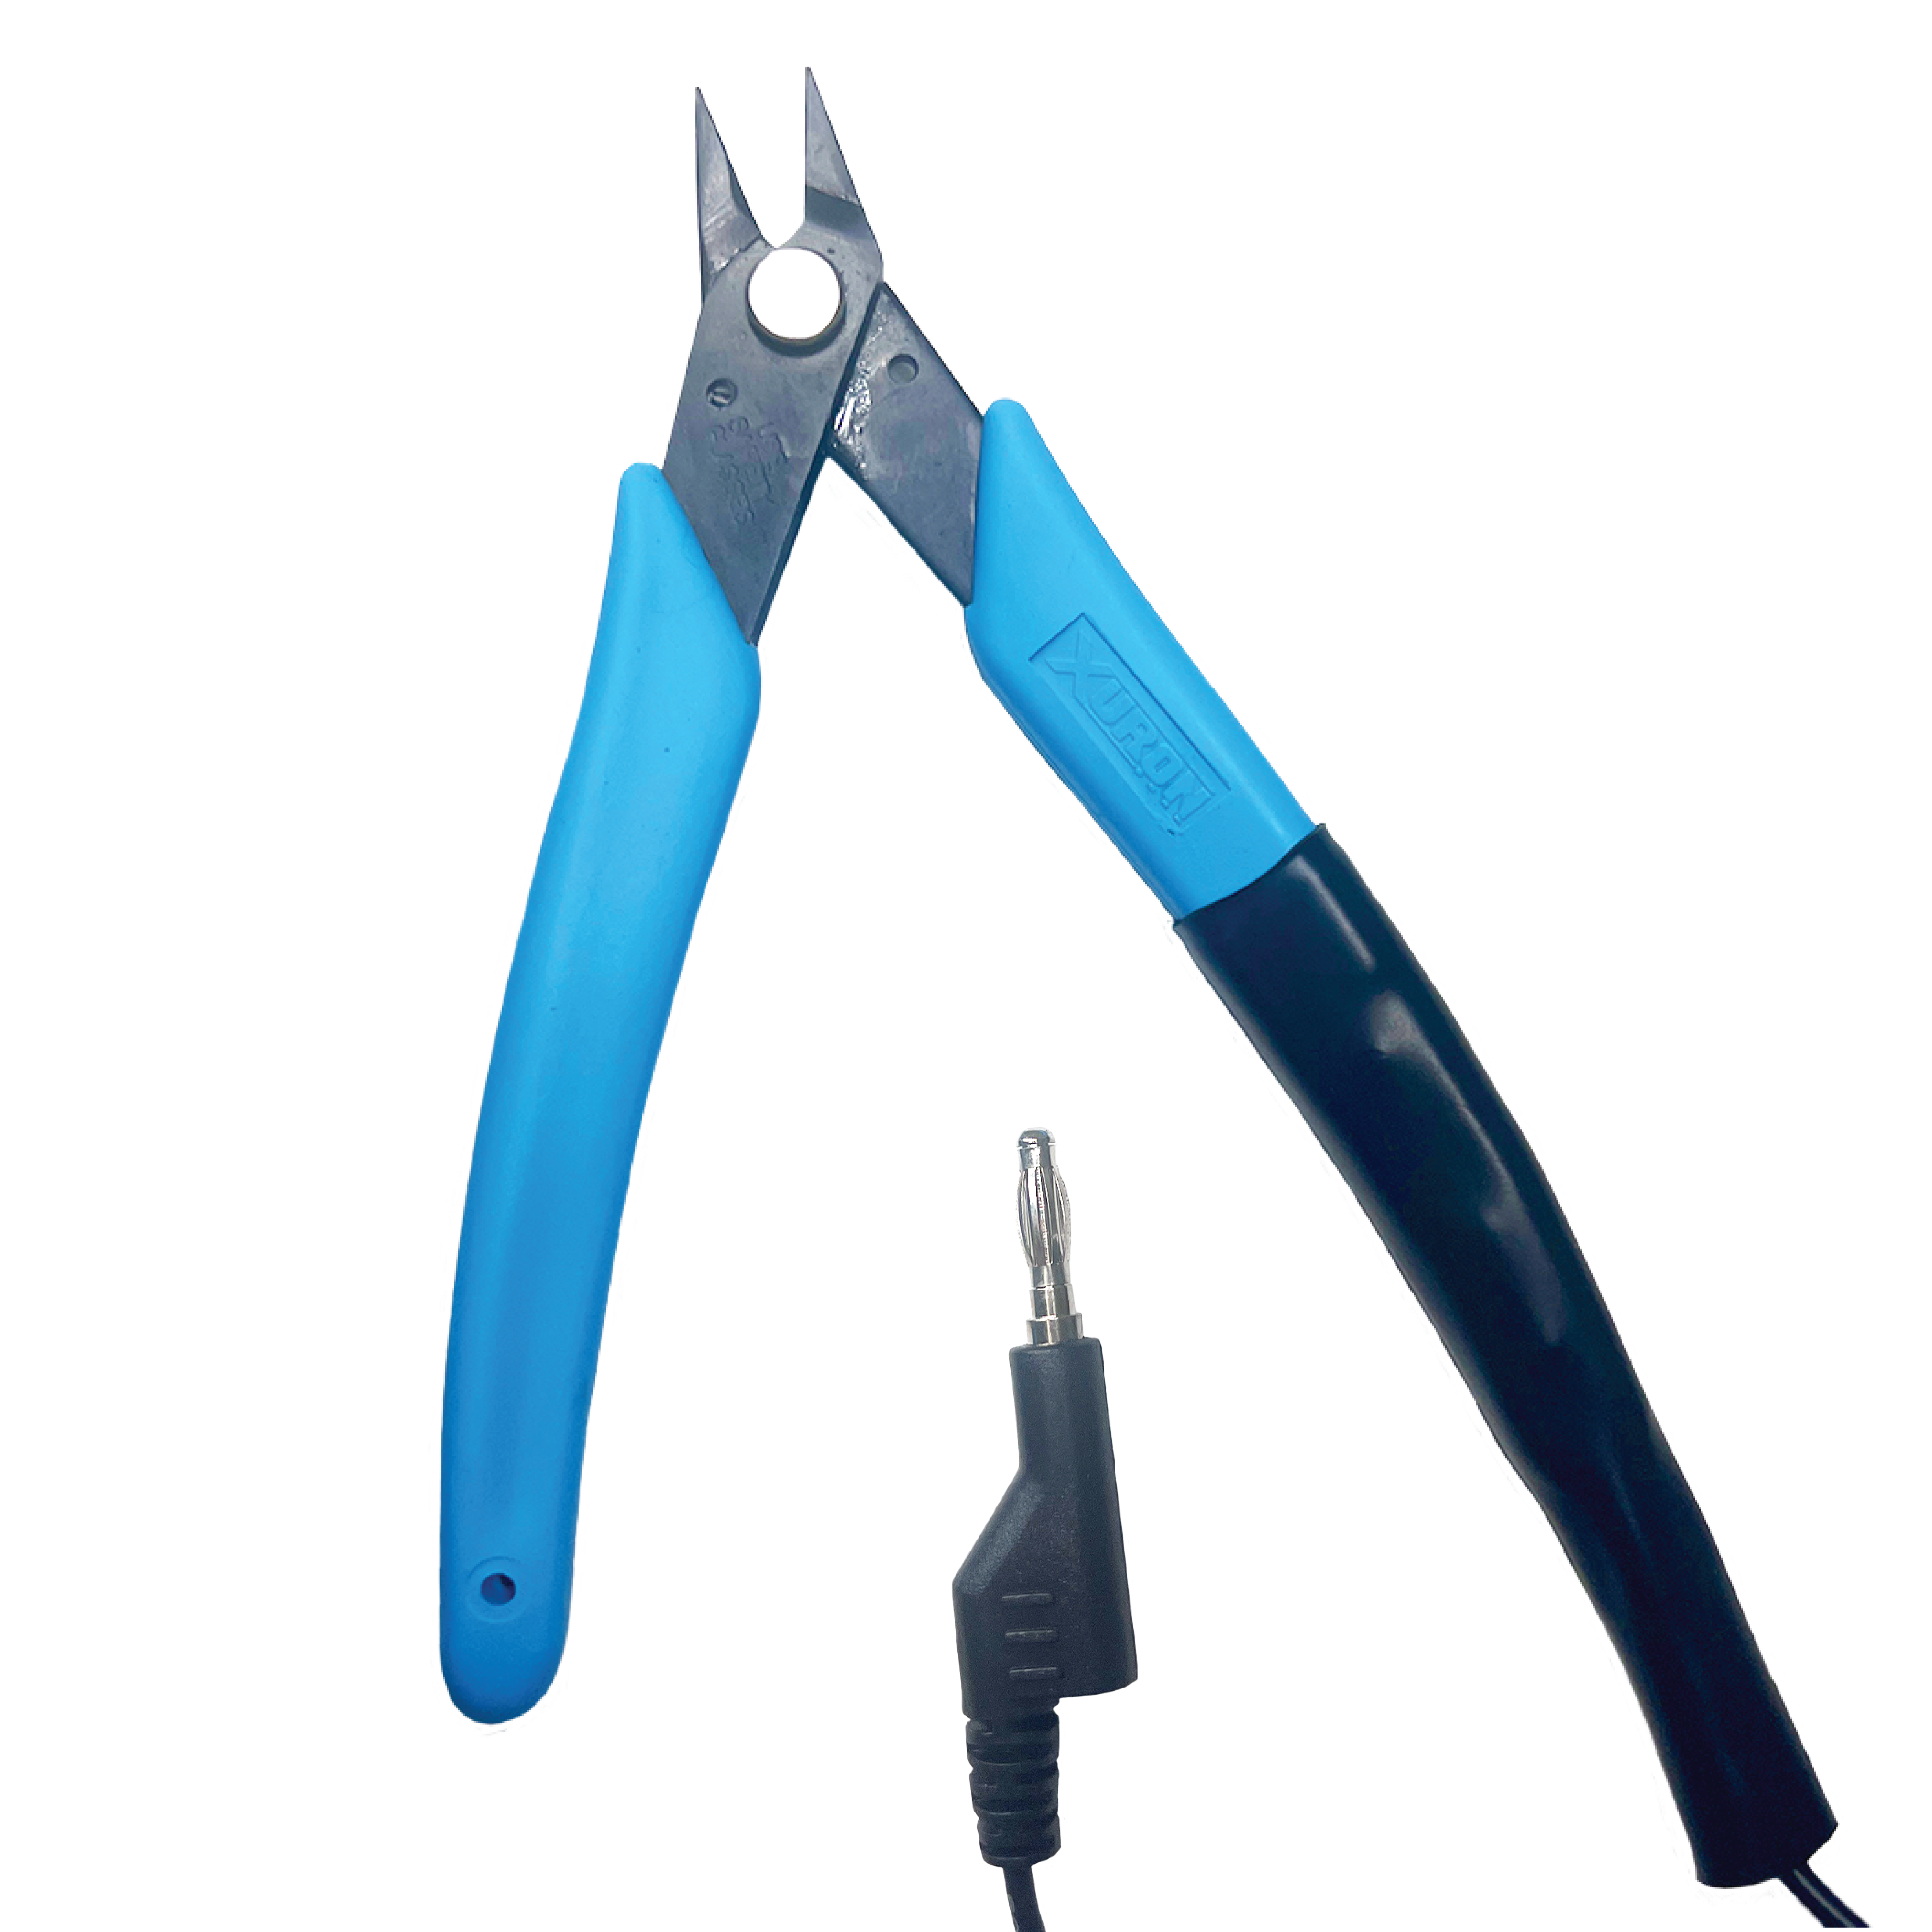 Flat nose plier without connection